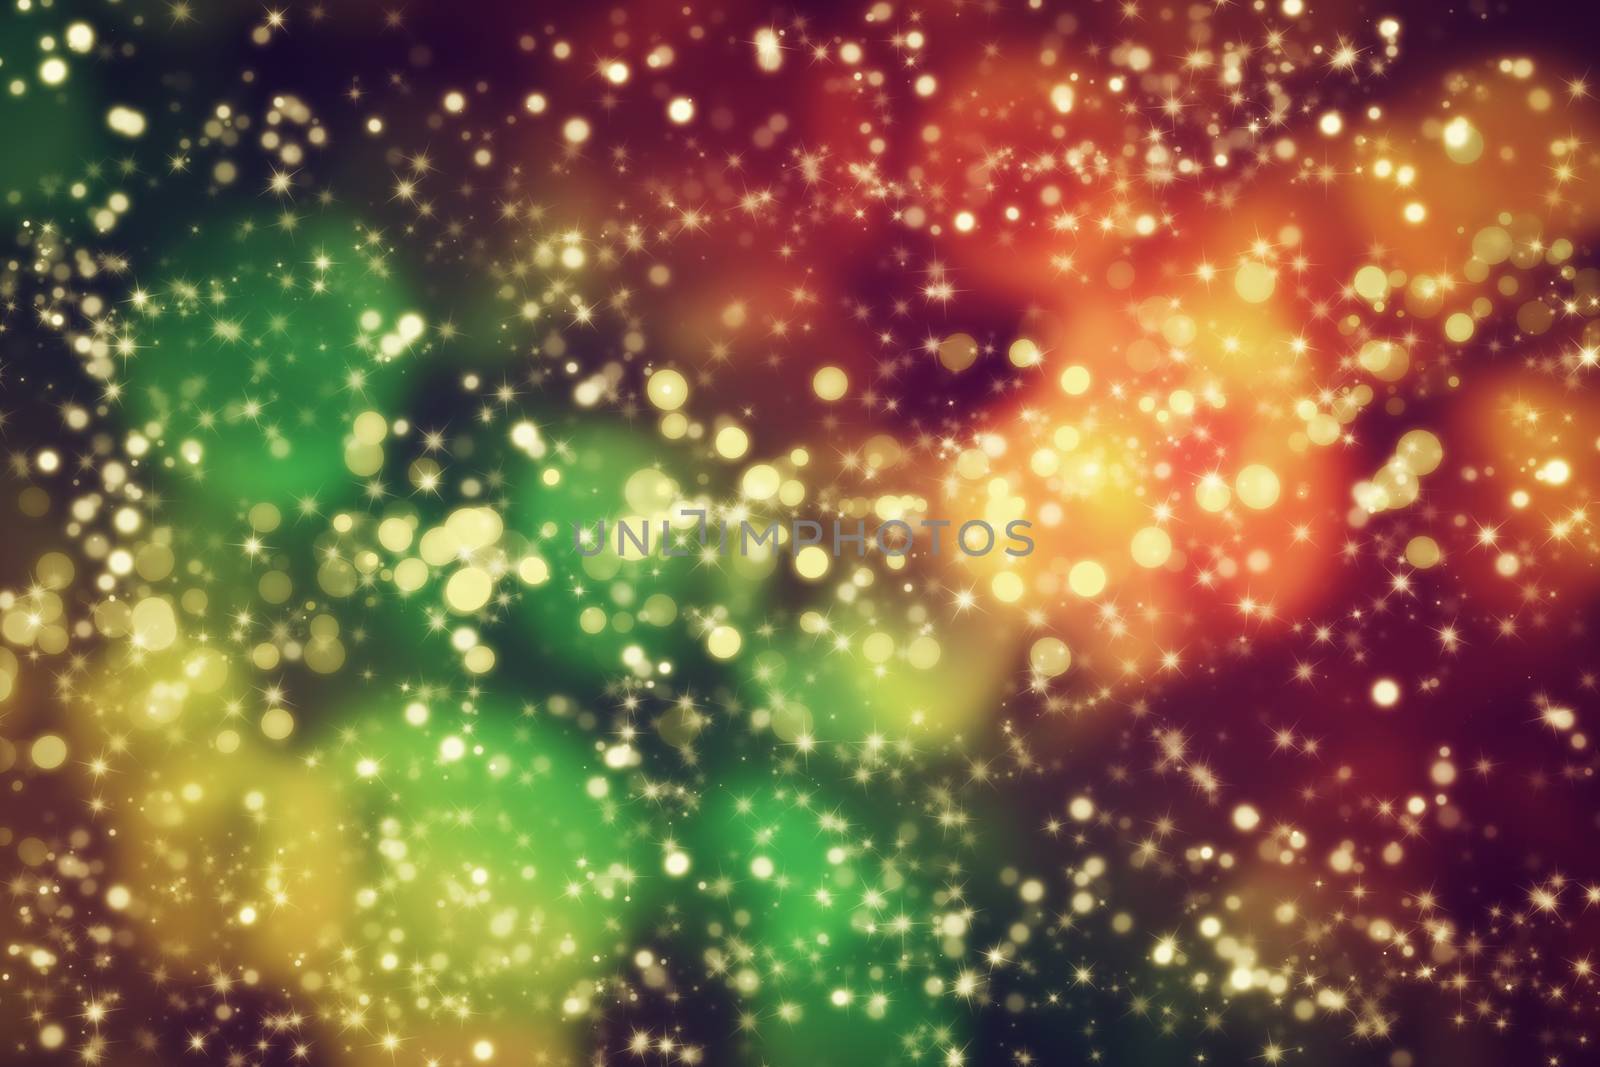 Galaxy, space abstract background. Stars, planets, lights by photocreo